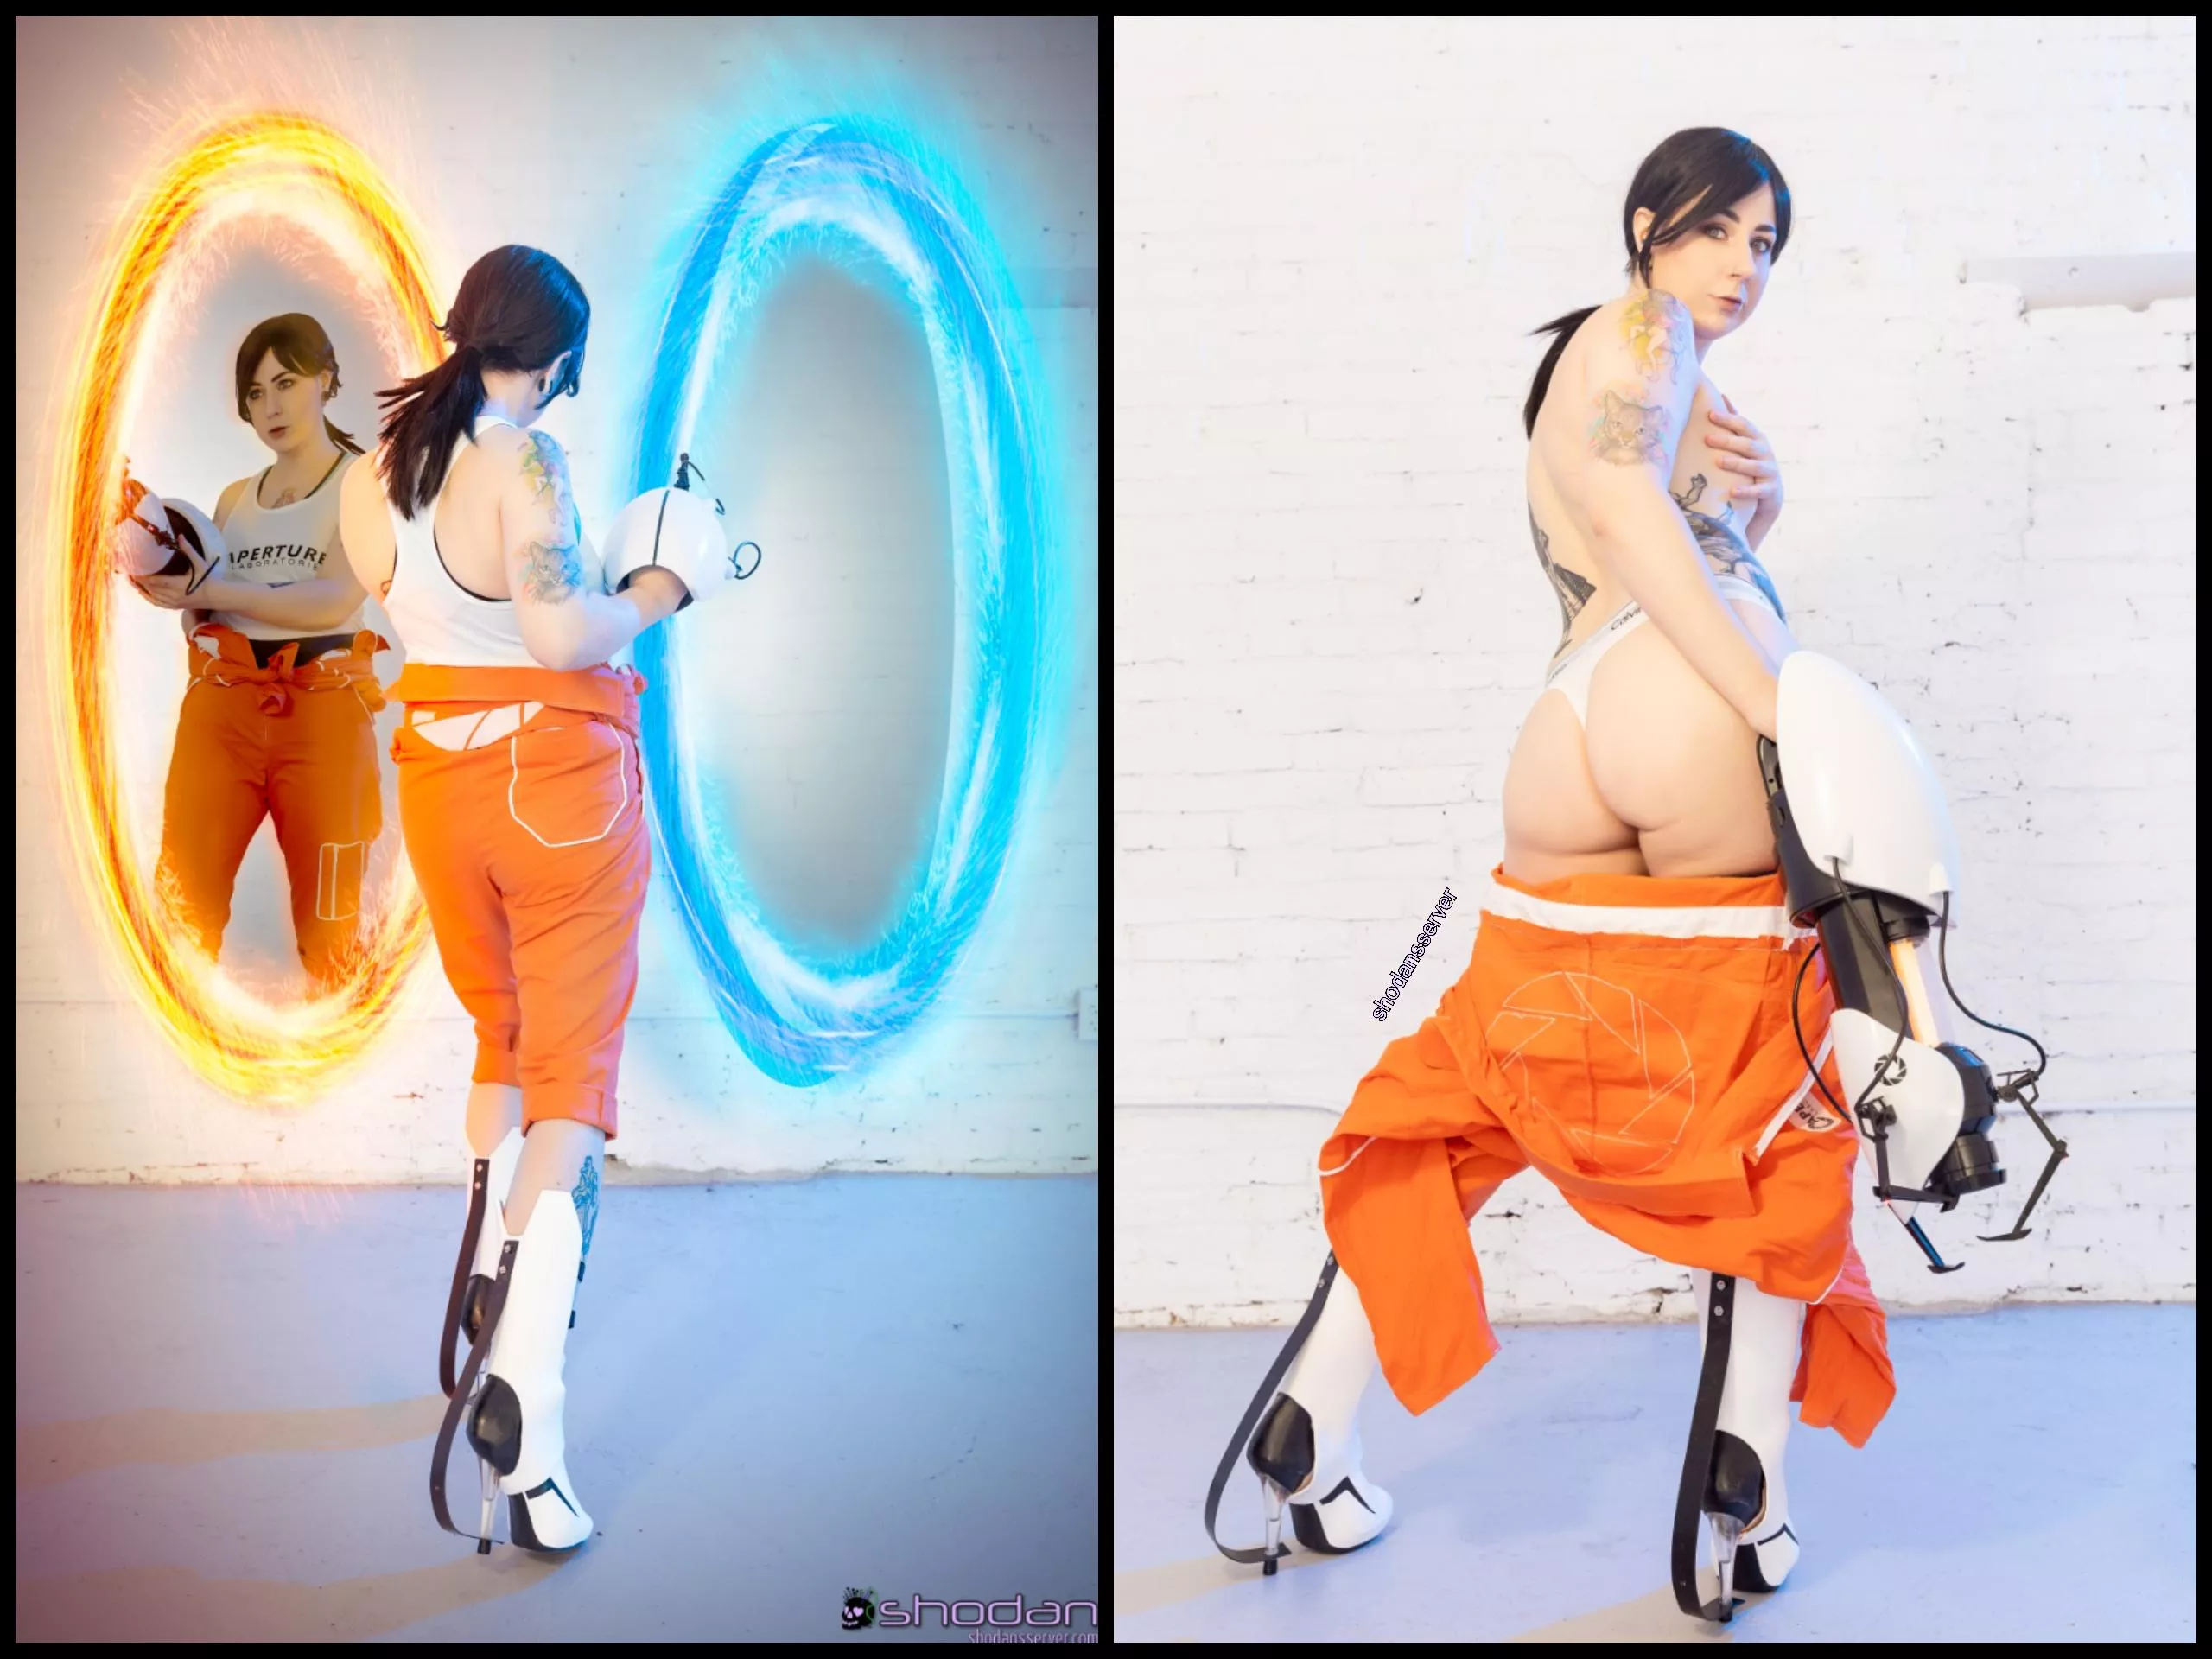 Nude Chell Porn - Chell from Portal 2 by Shodan nudes : cosplayonoff | NUDE-PICS.ORG